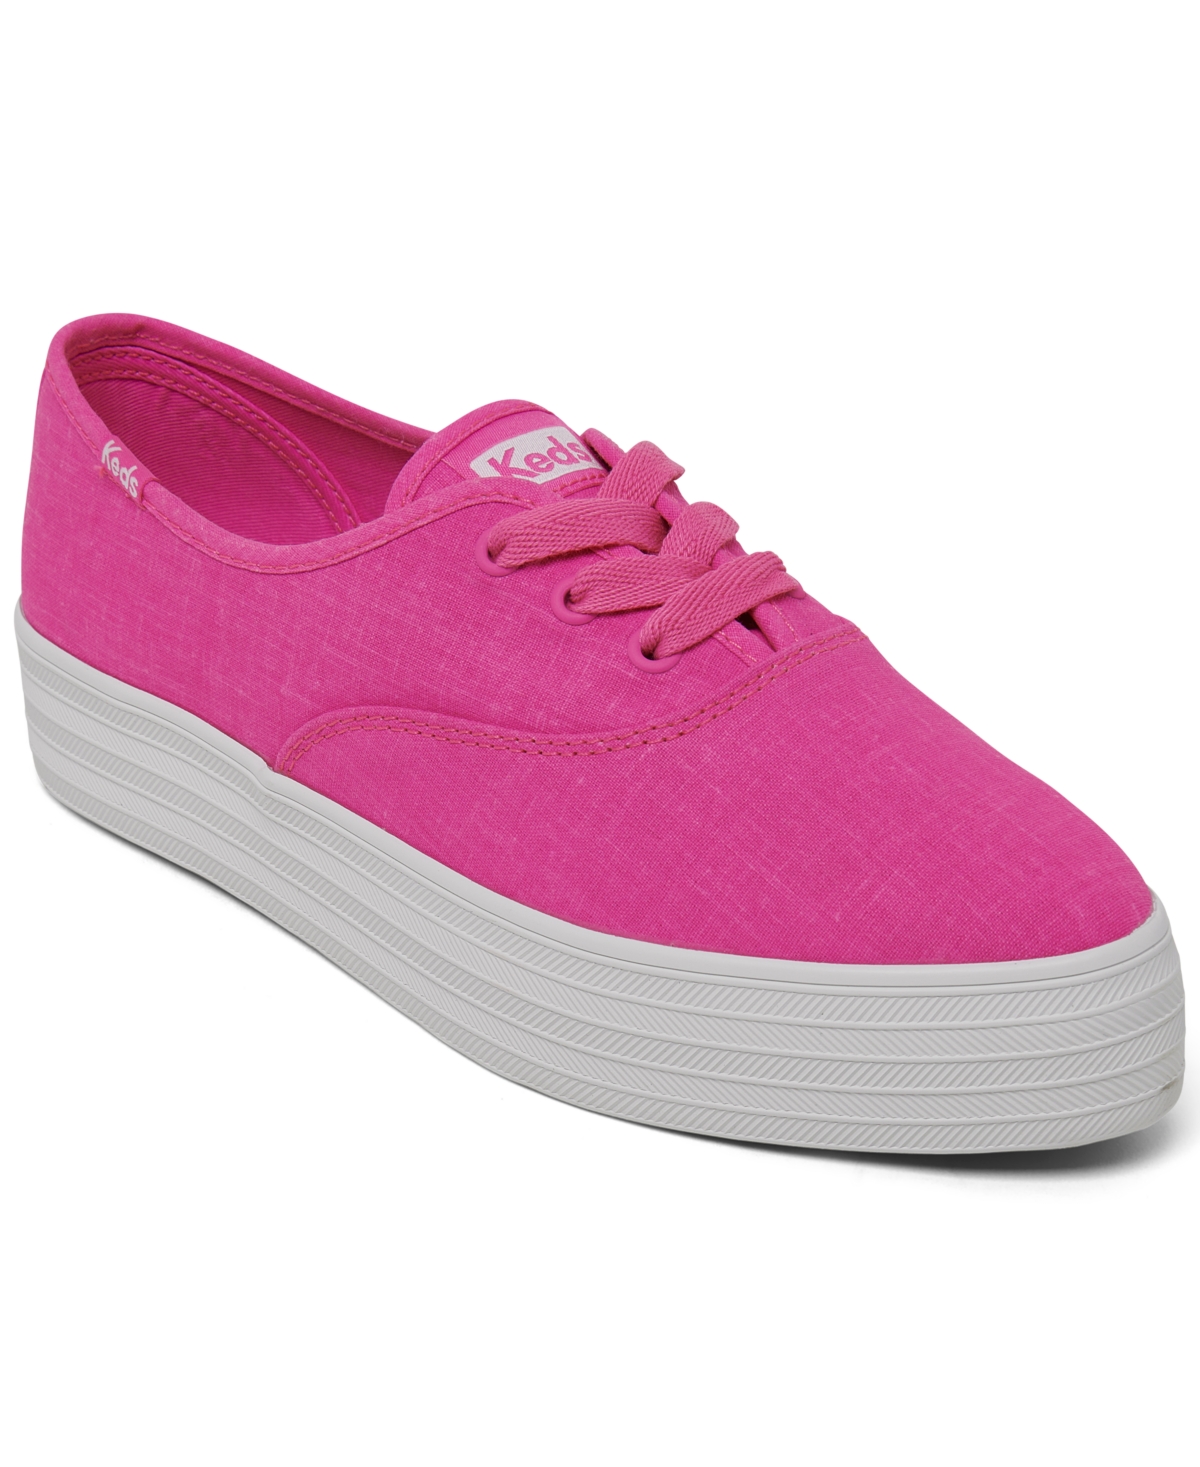 Women's Point Canvas Lace-Up Platform Casual Sneakers from Finish Line - Bright Pink